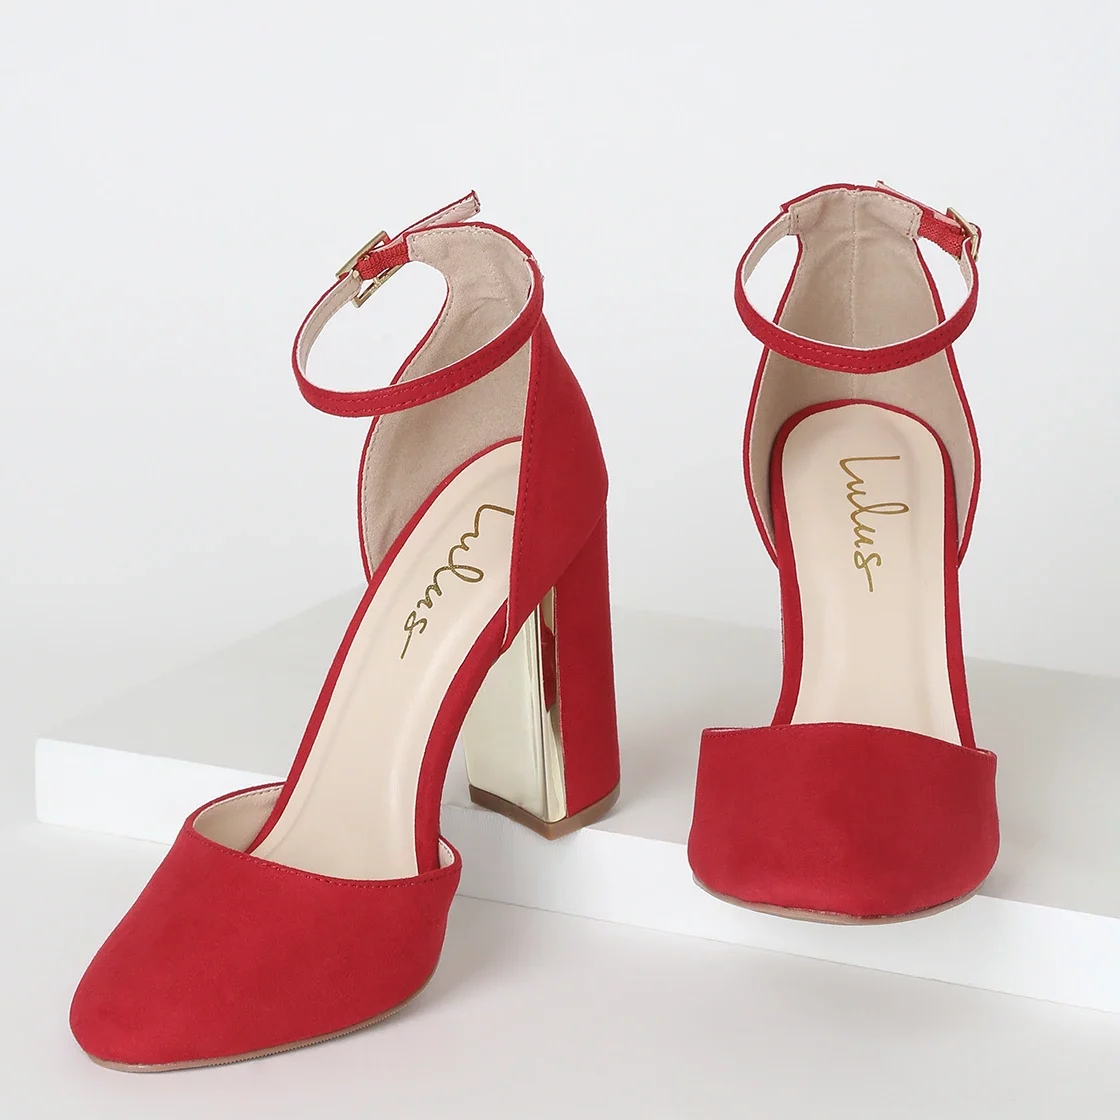 Share 168+ red ankle strap heels latest - esthdonghoadian